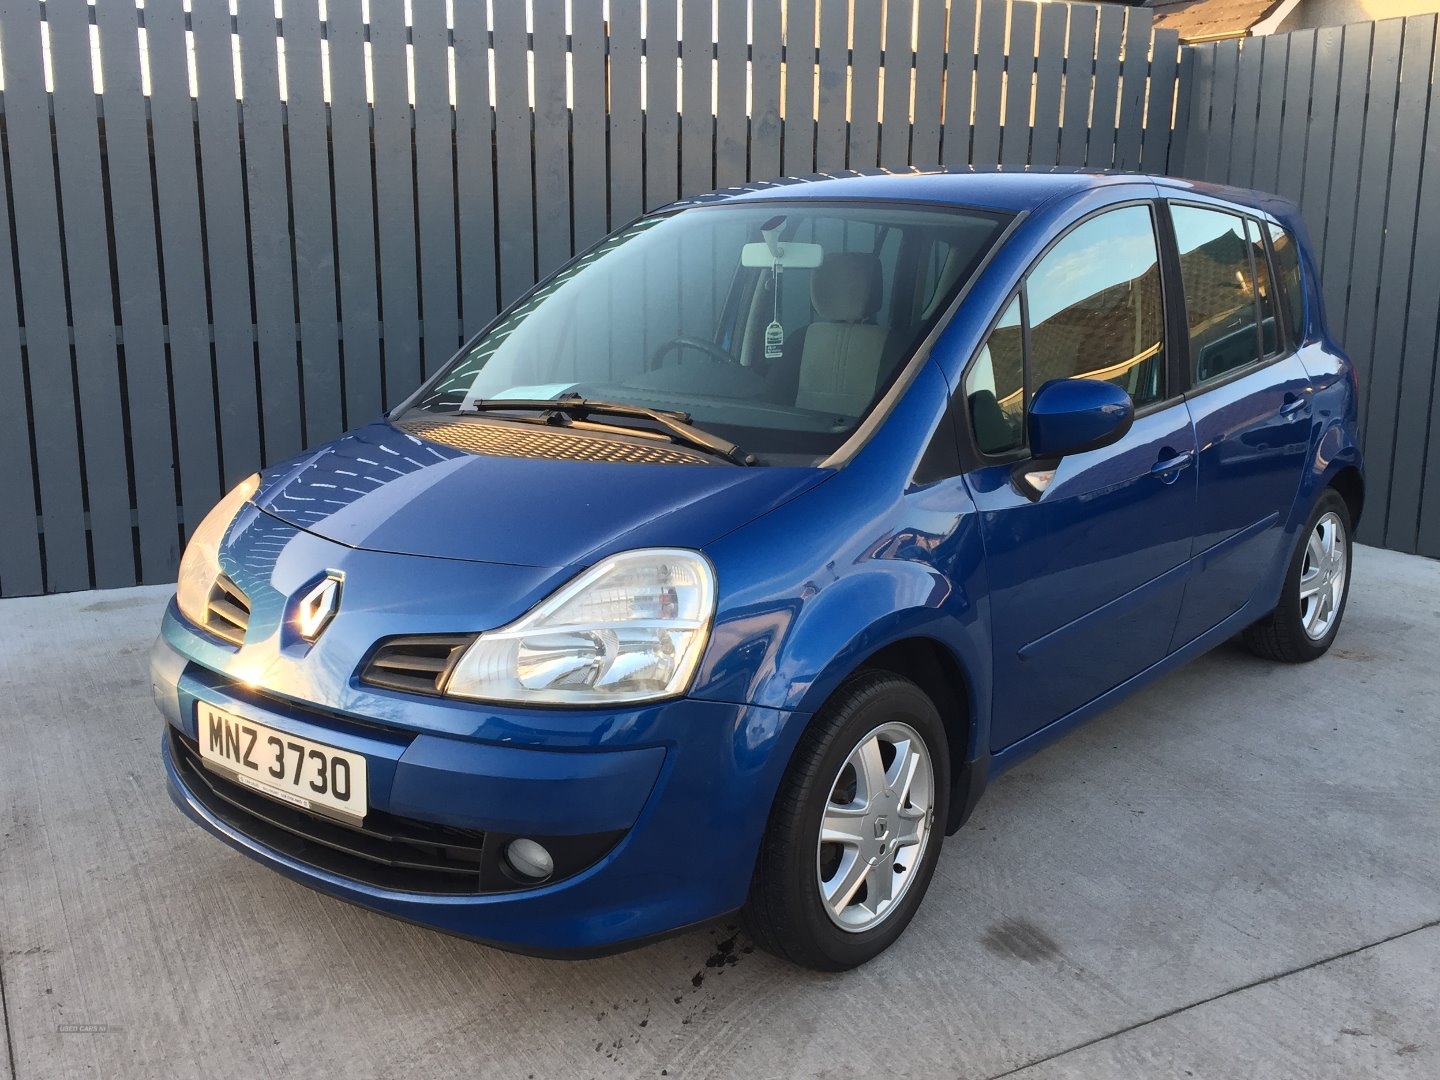 test22008 Renault Modus 1.2  TCE  Dynamique  5dr  Full  Service  History Petrol Manual  – JF Car Sales Ballymoney